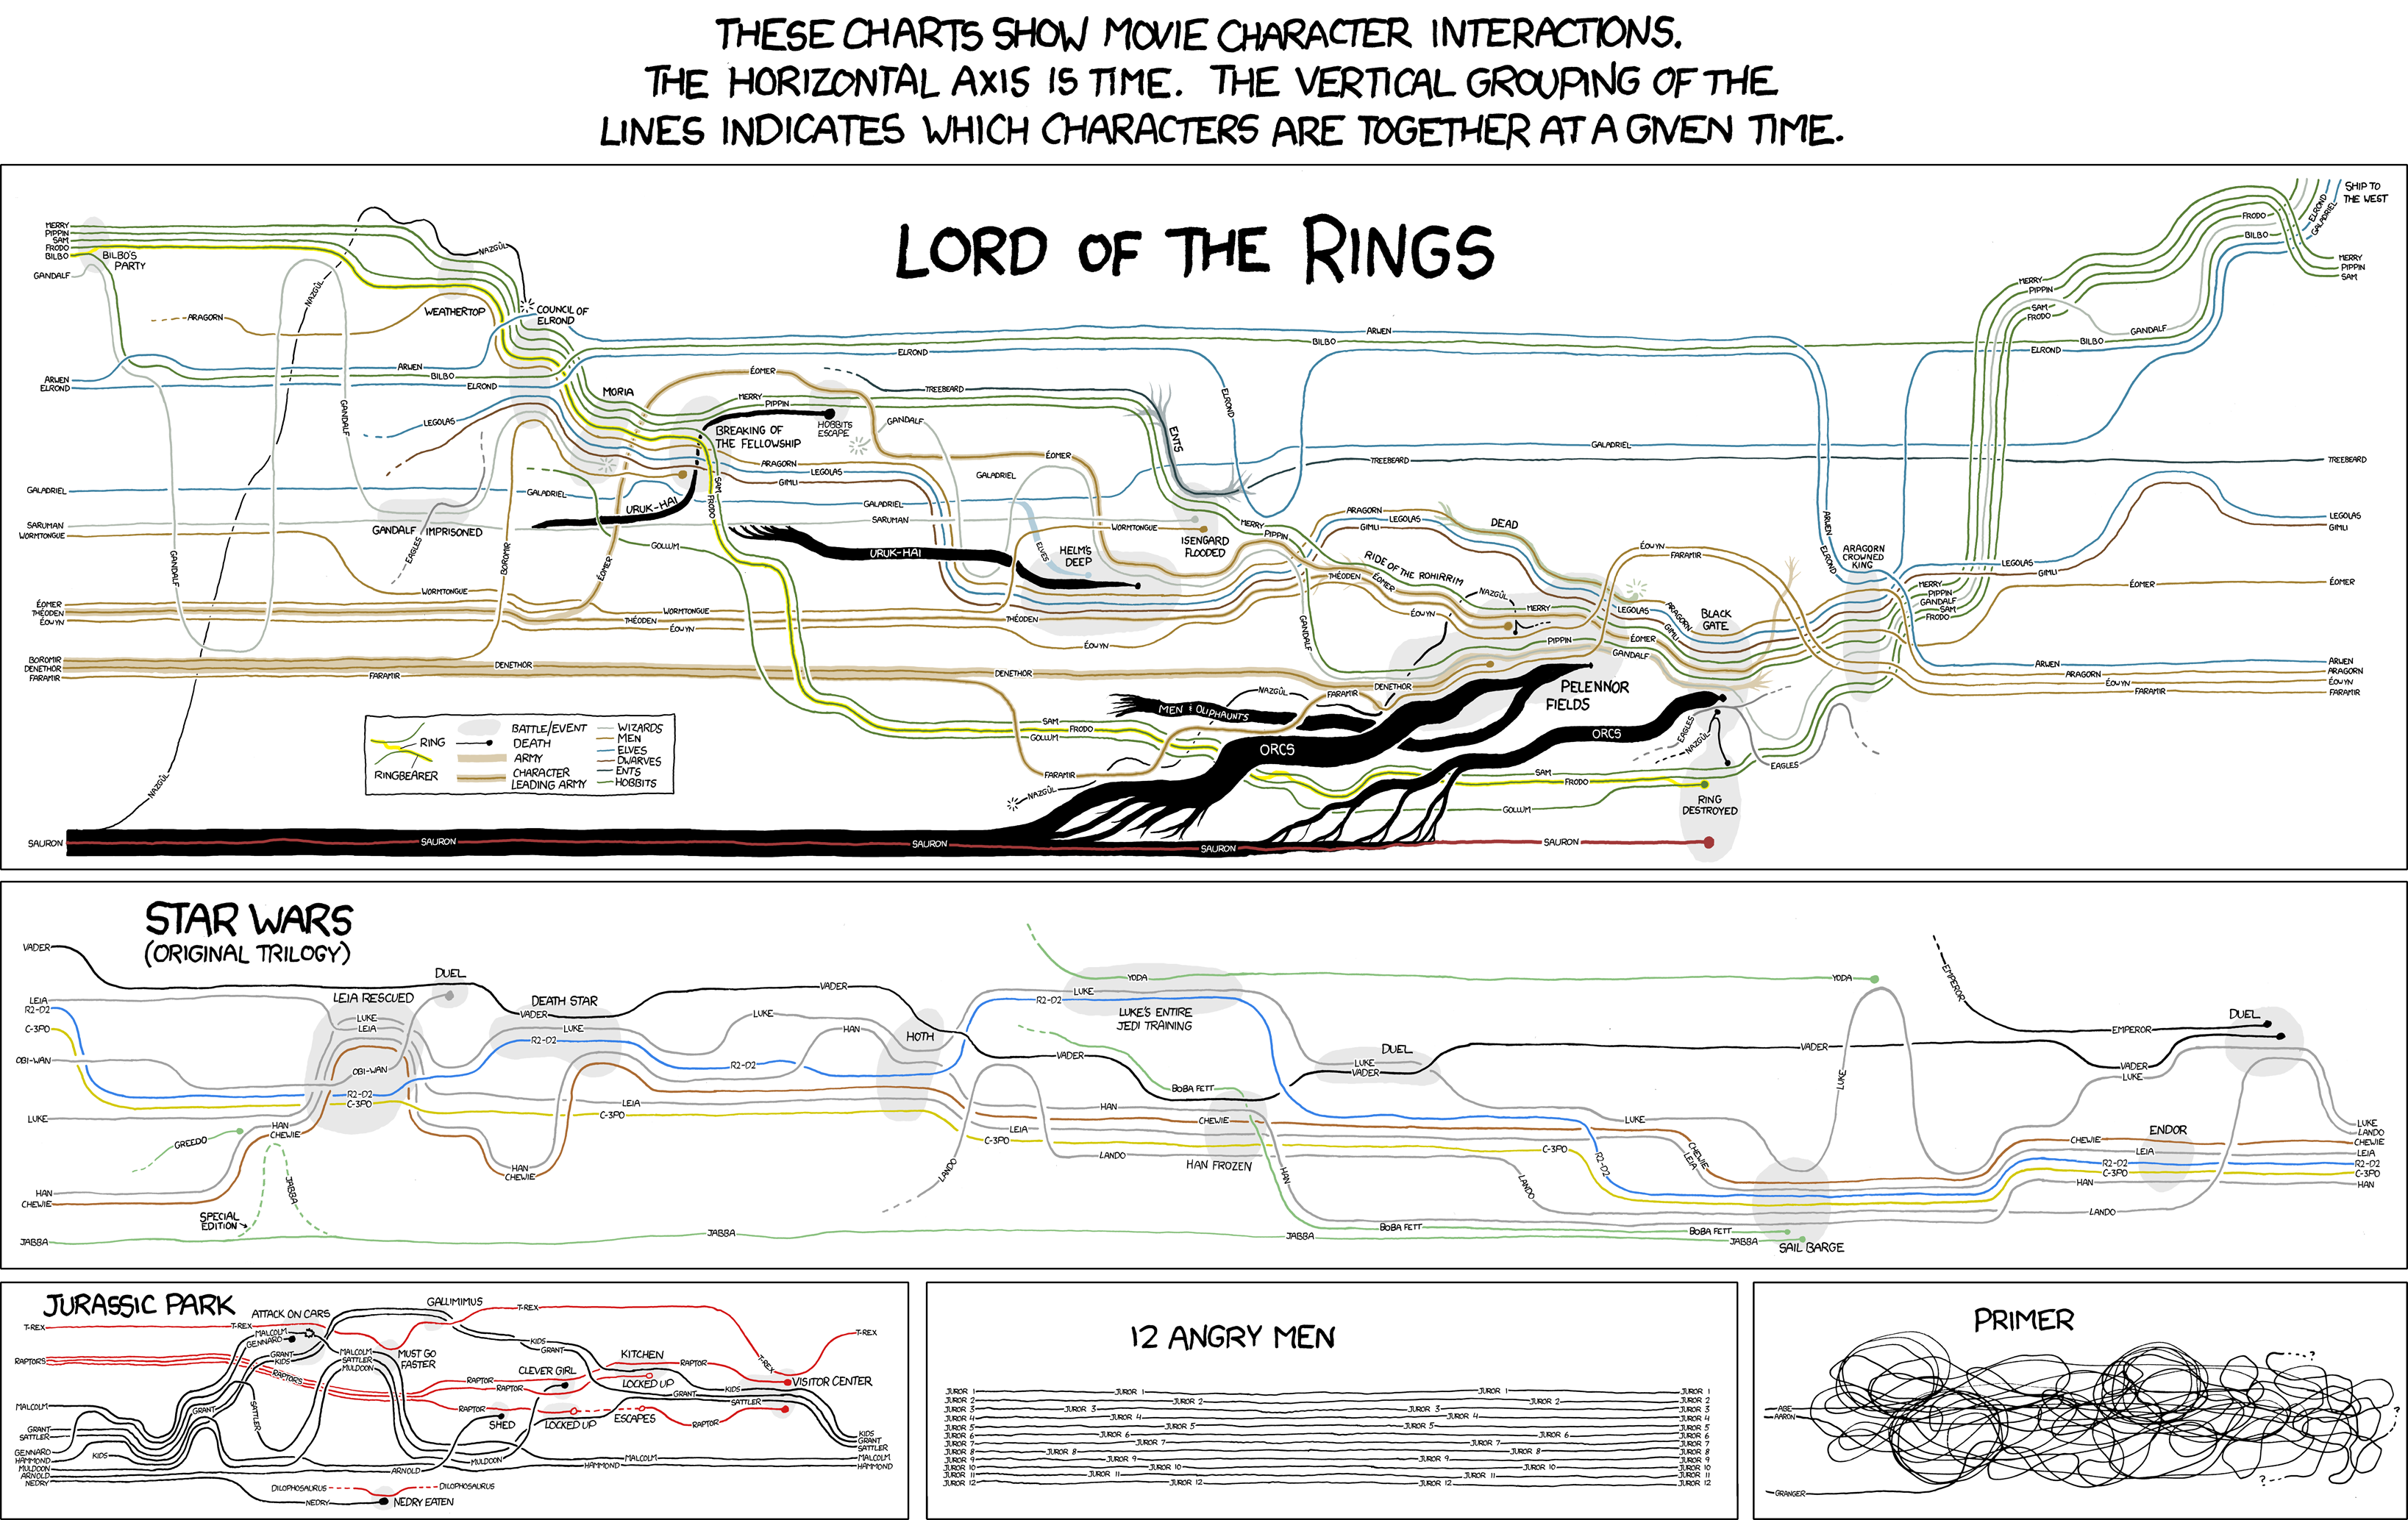 xkcd character interaction maps - http://xkcd.com/